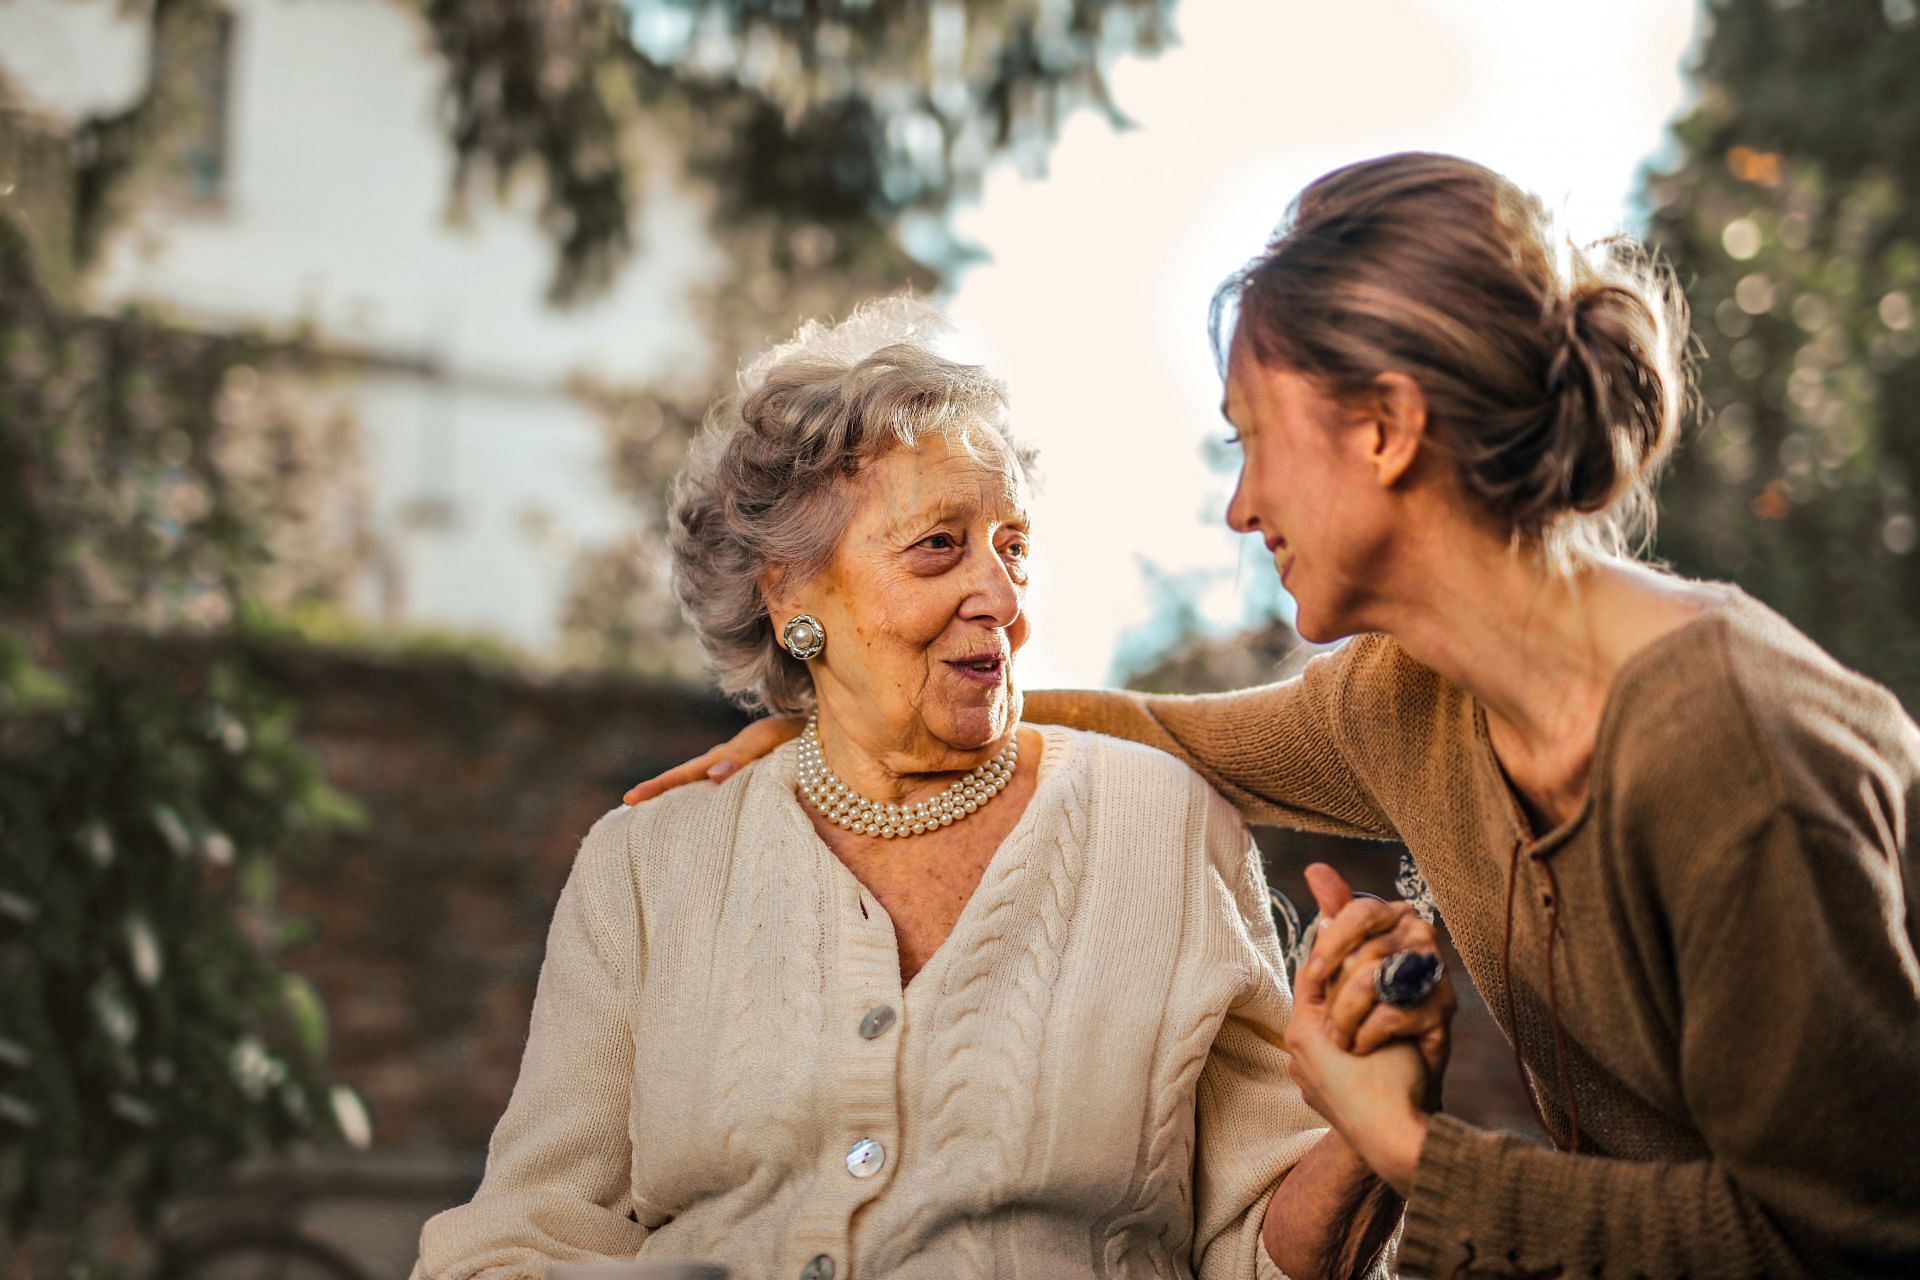 What is validation therapy? Can it work for people with dementia? (Image via Pexels/ Andrea Piacquadio)